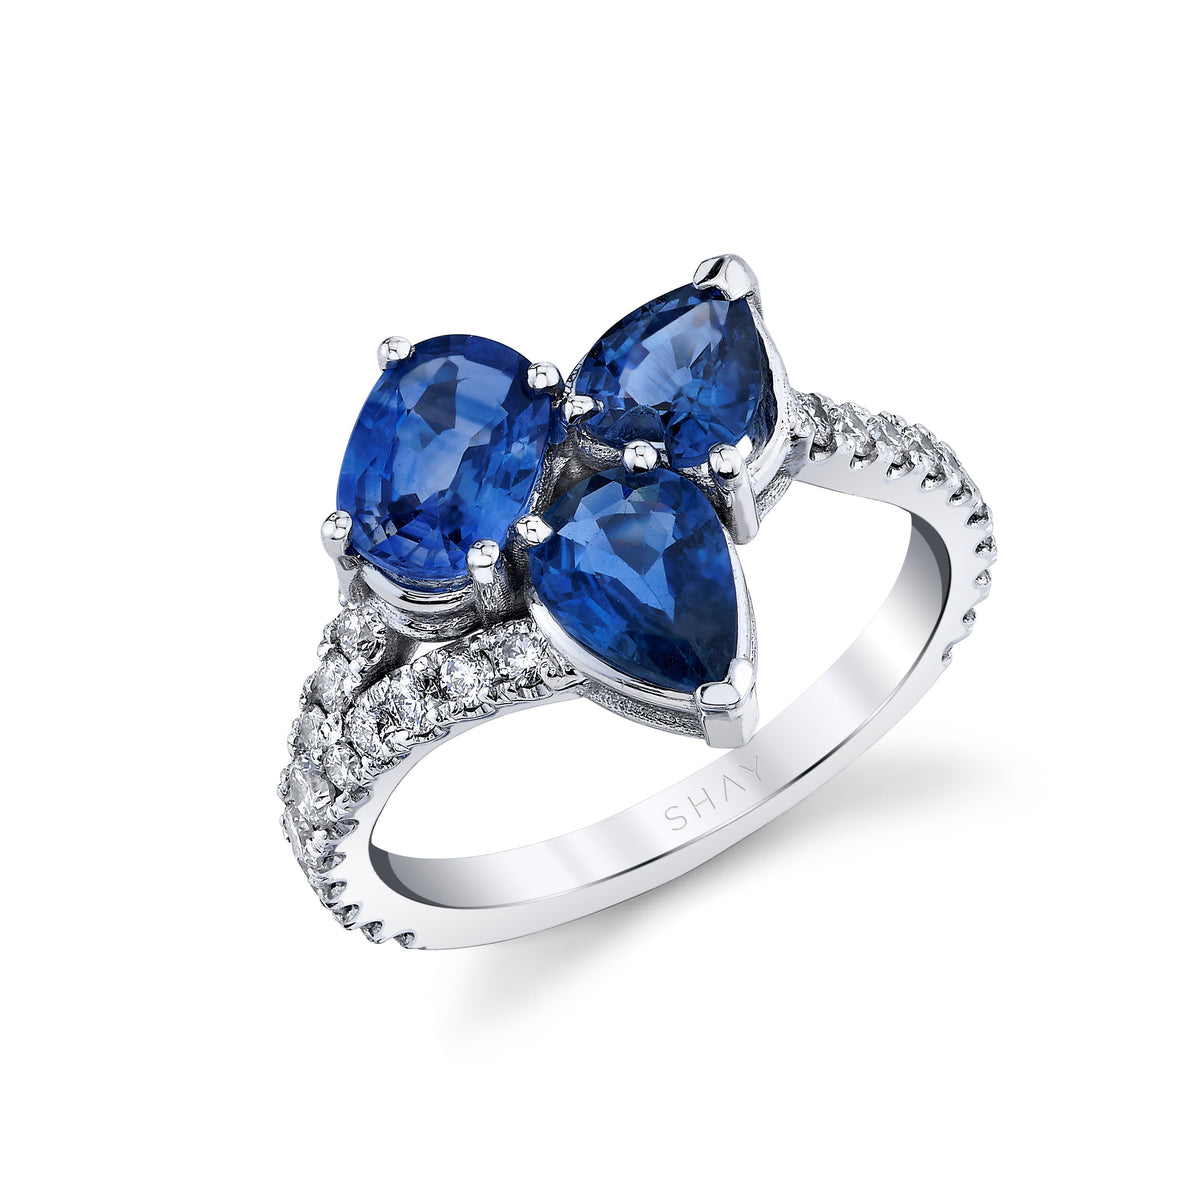 READY TO SHIP BLUE SAPPHIRE CLUSTER & DIAMOND BAND RING